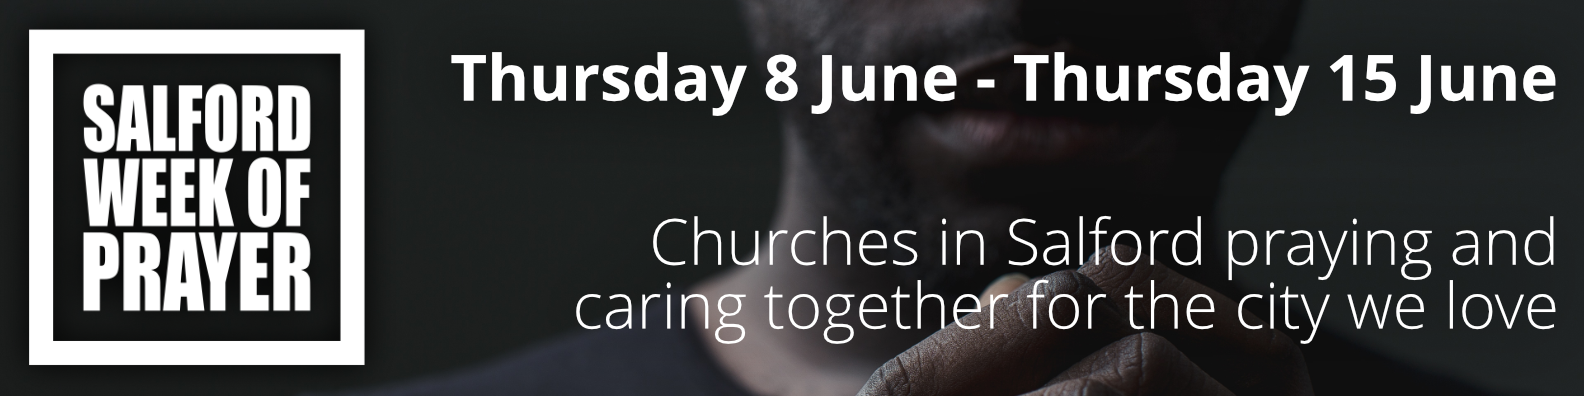 Salford Week of Prayer | Thursday 8 June - Thursday 15 June | Churches in Salford praying and caring together for the city we love